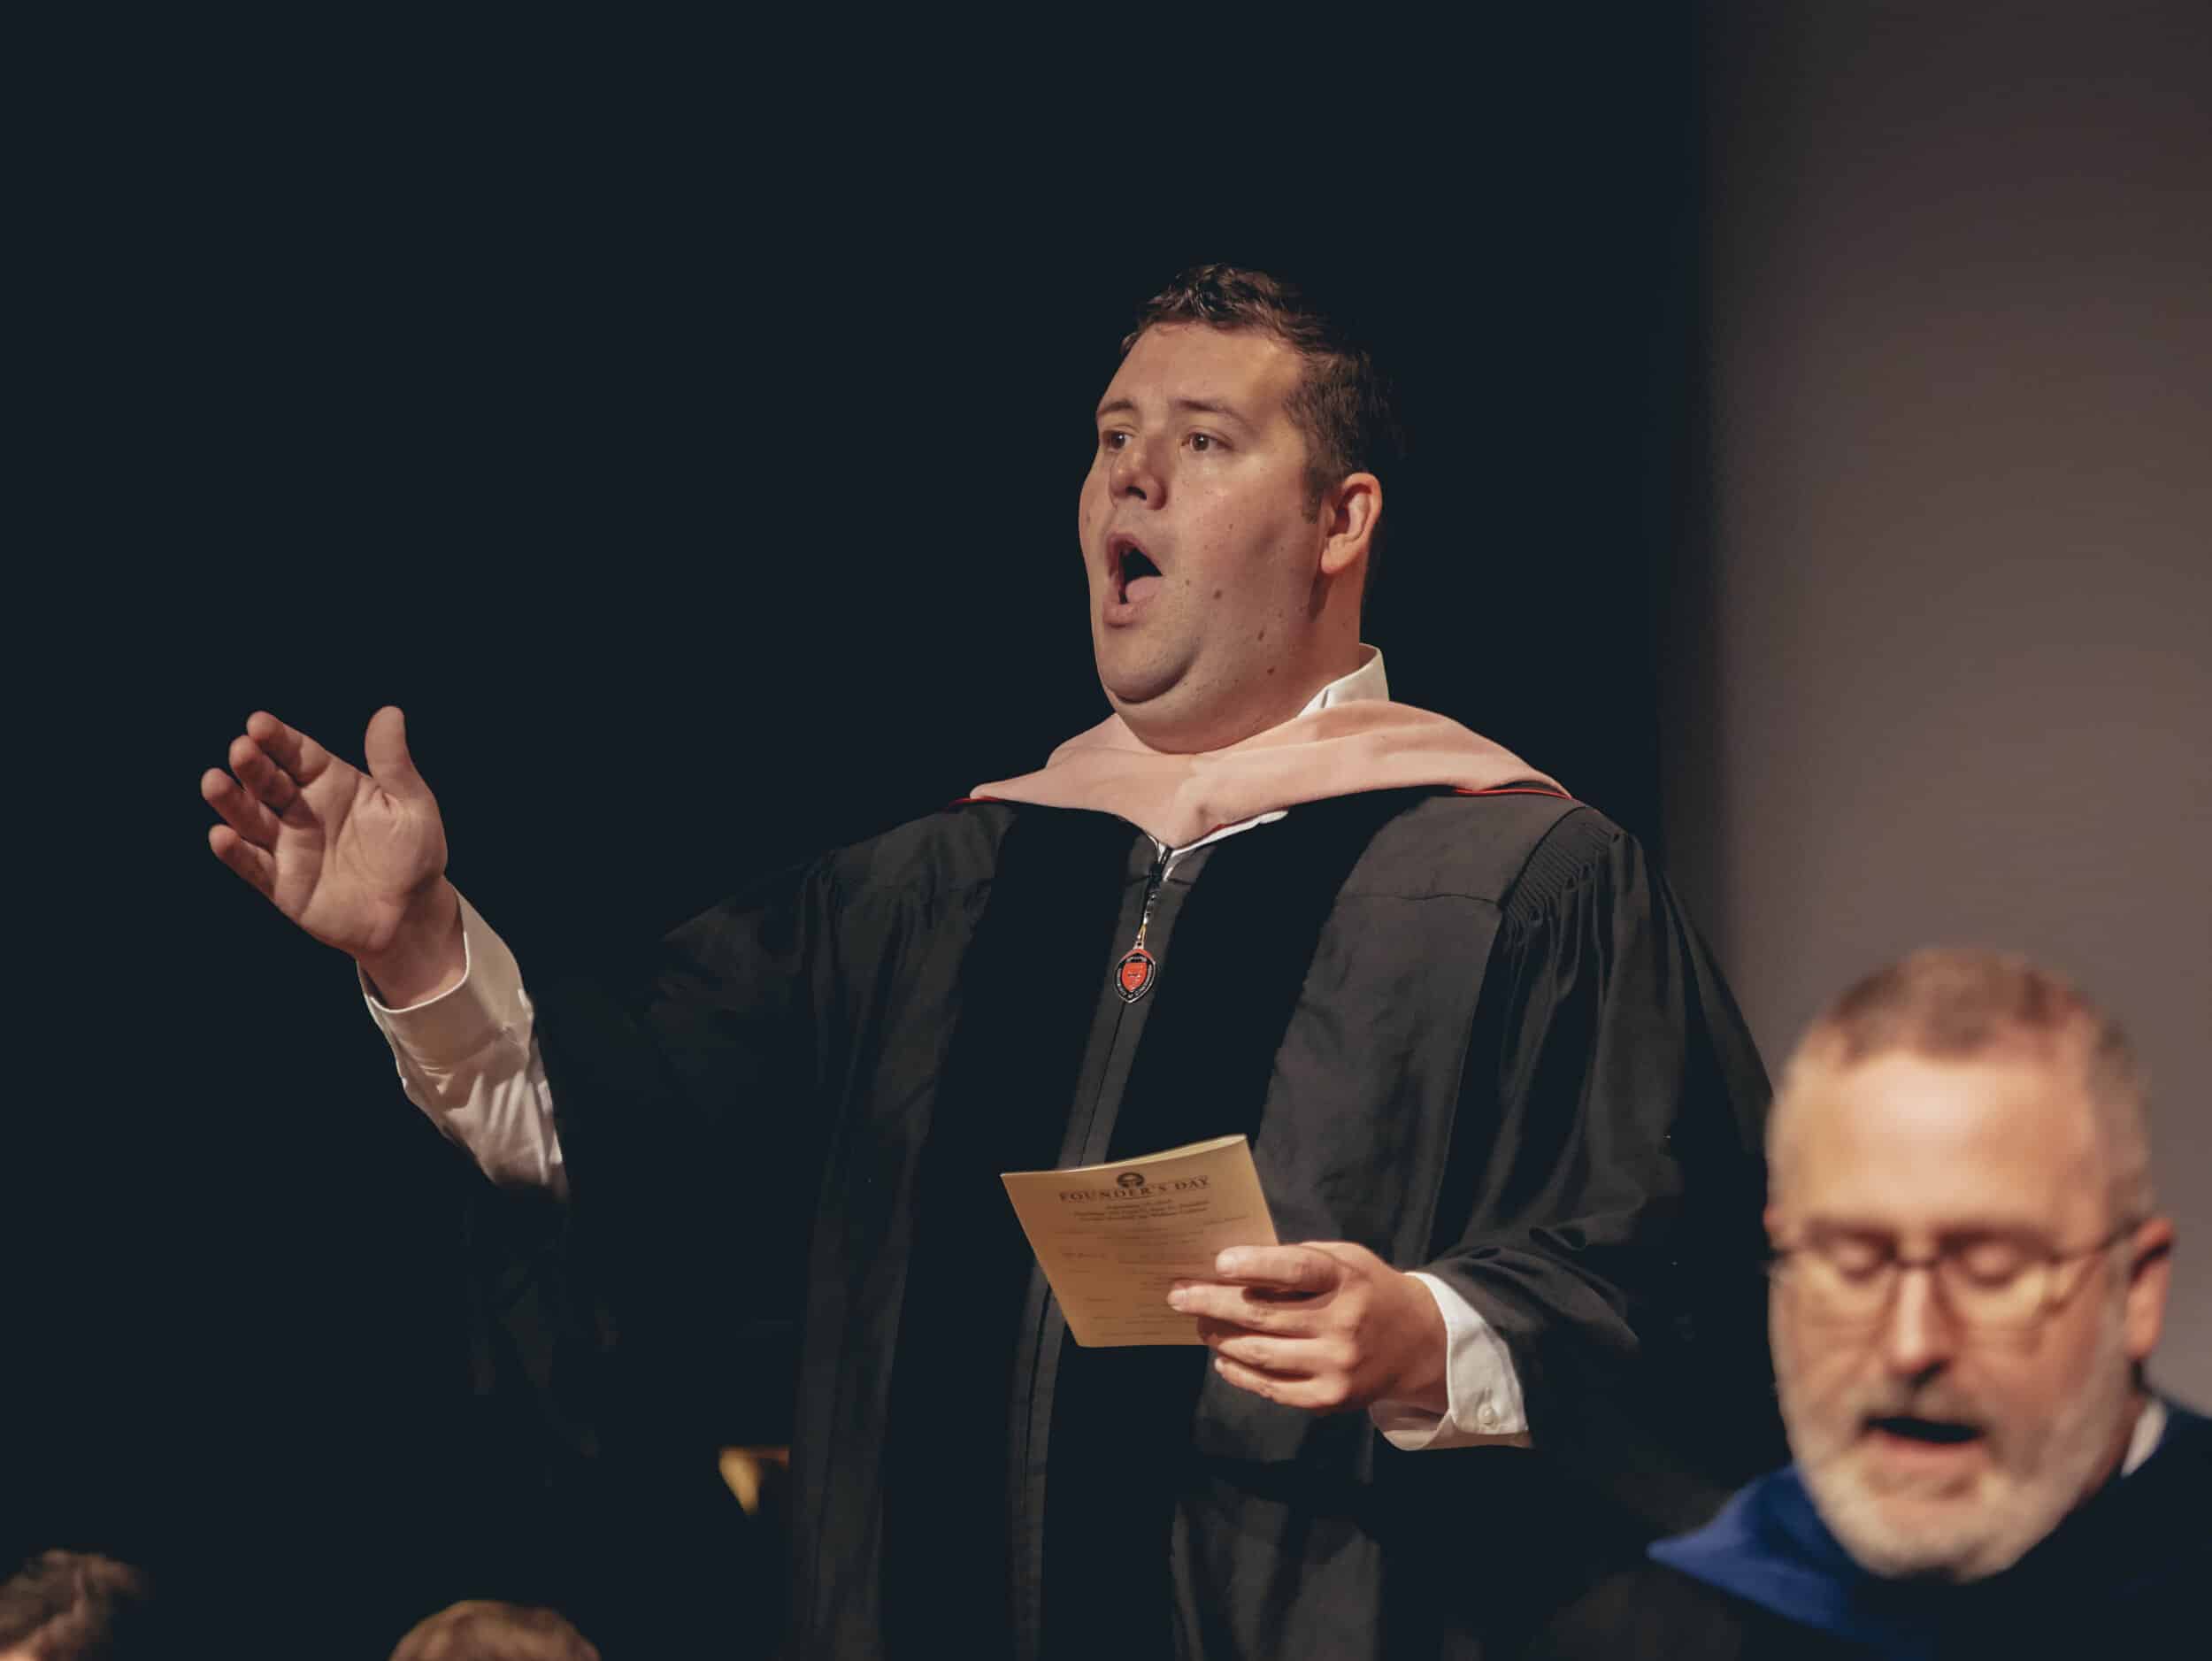 Seth Killen associate professor of voice leads the congregation in the reciting of the universities alma mater.